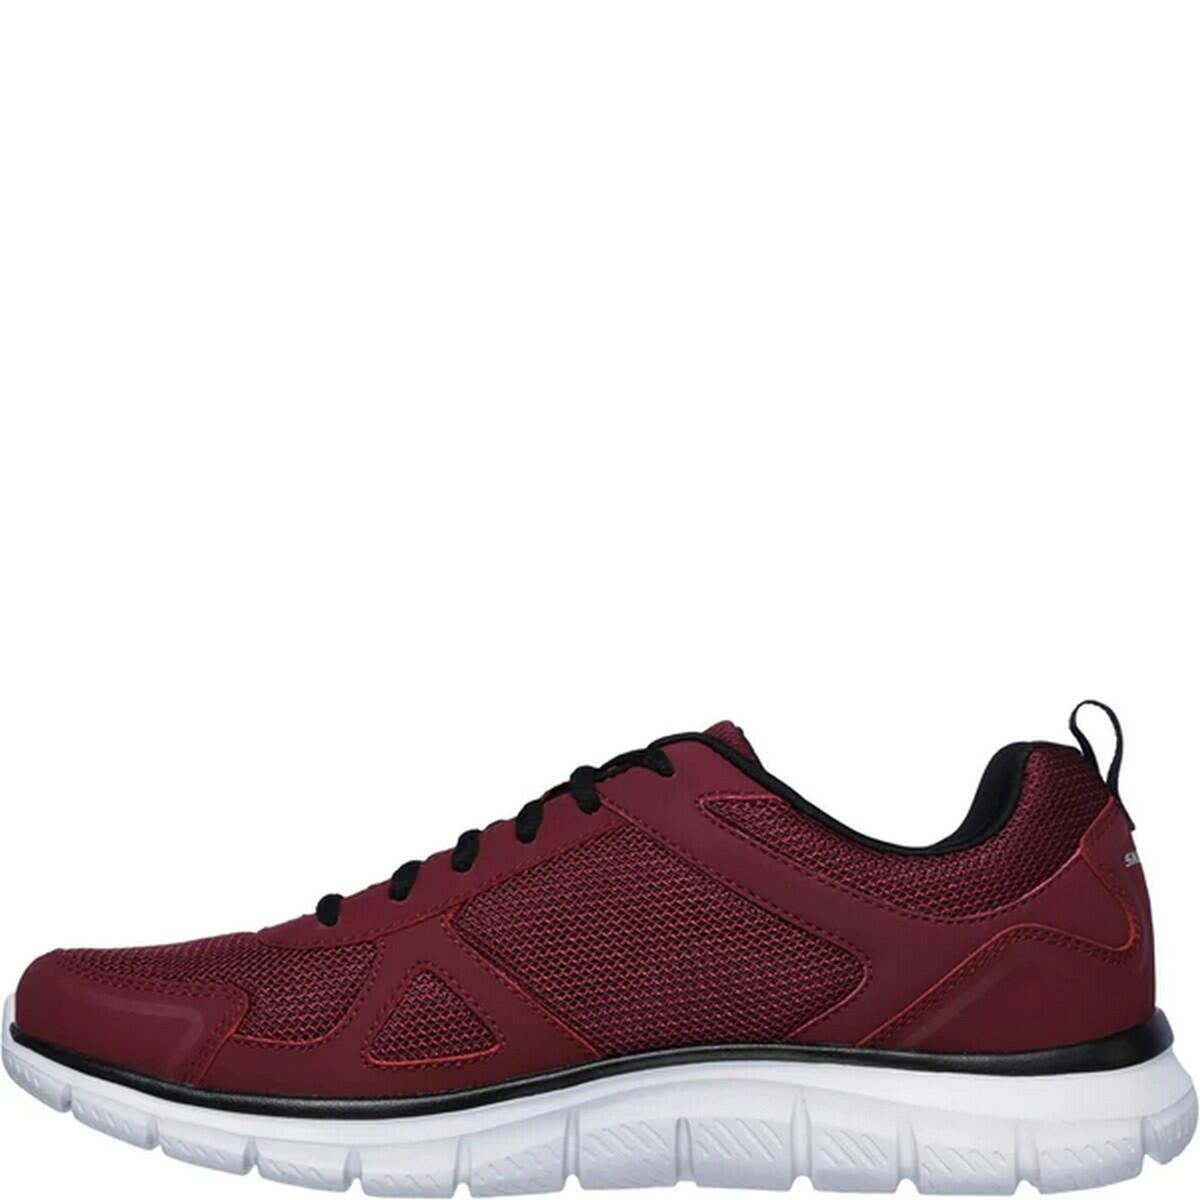 Mens Track Scloric Leather Trainers (Burgundy/Black) 2/5